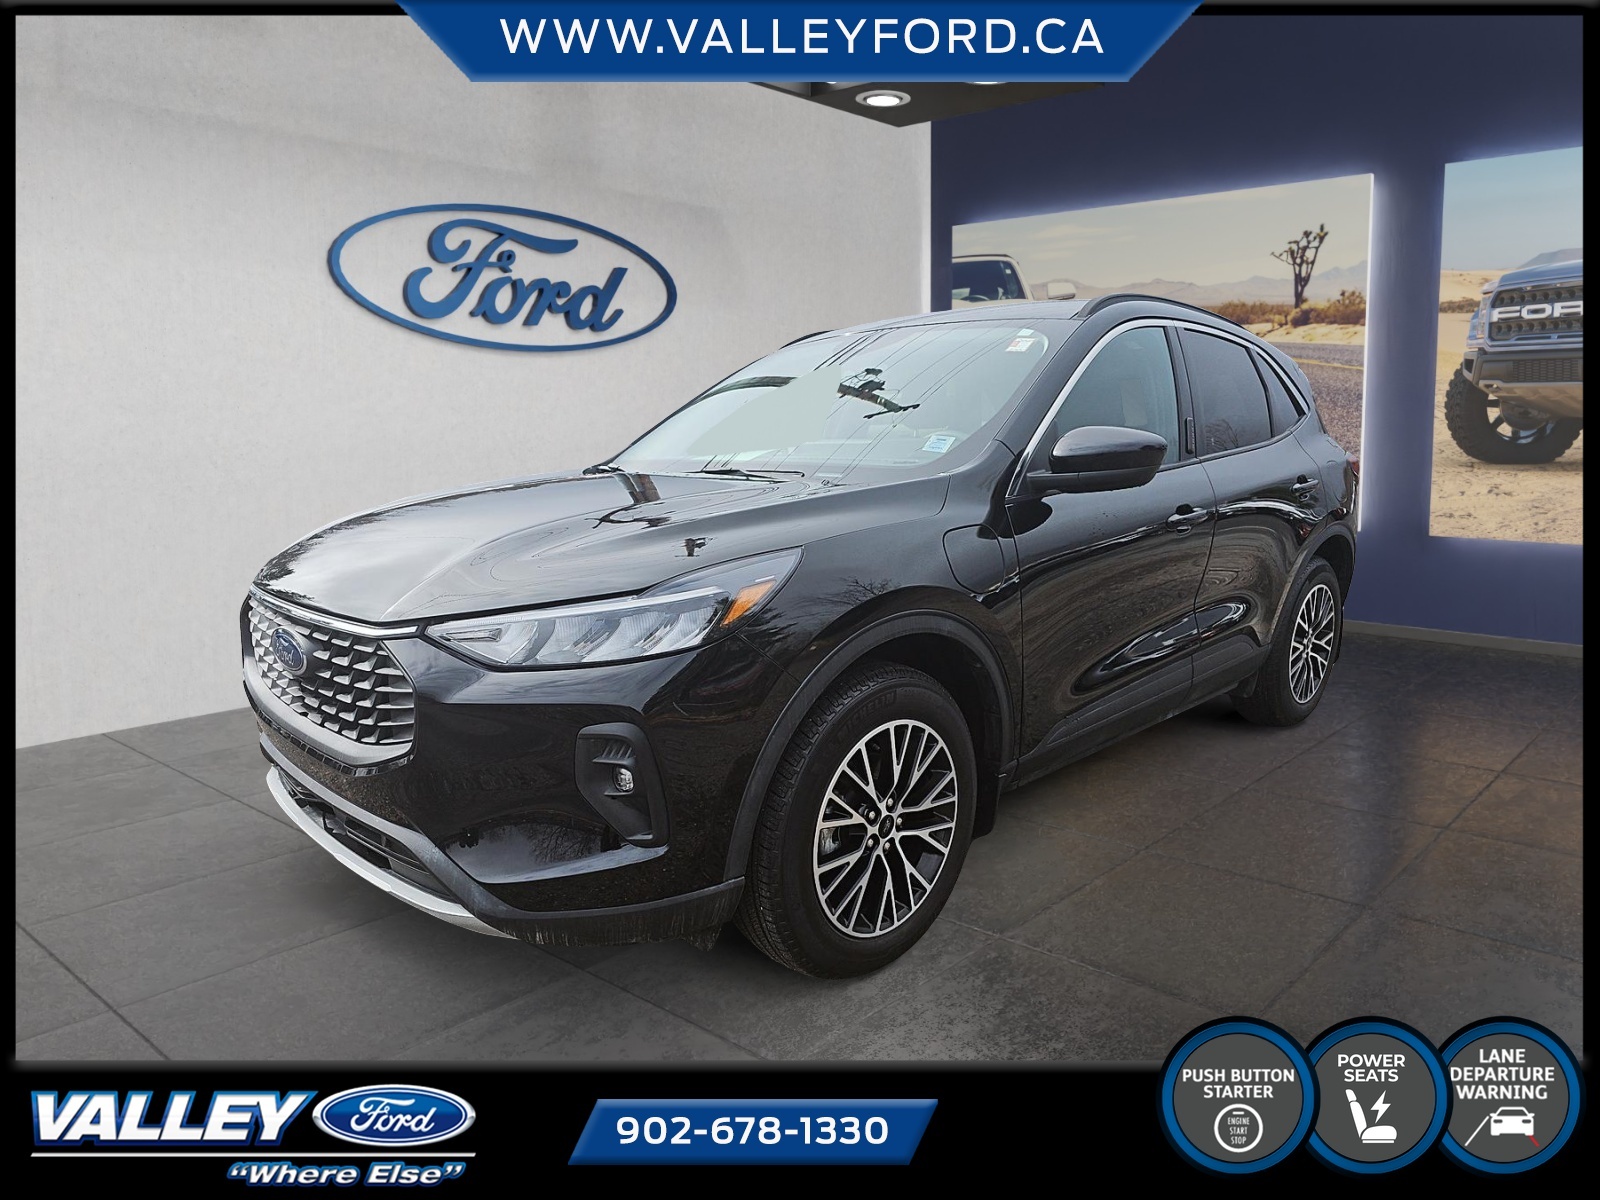 2023 Ford Escape PHEV $1000 Rebate Available